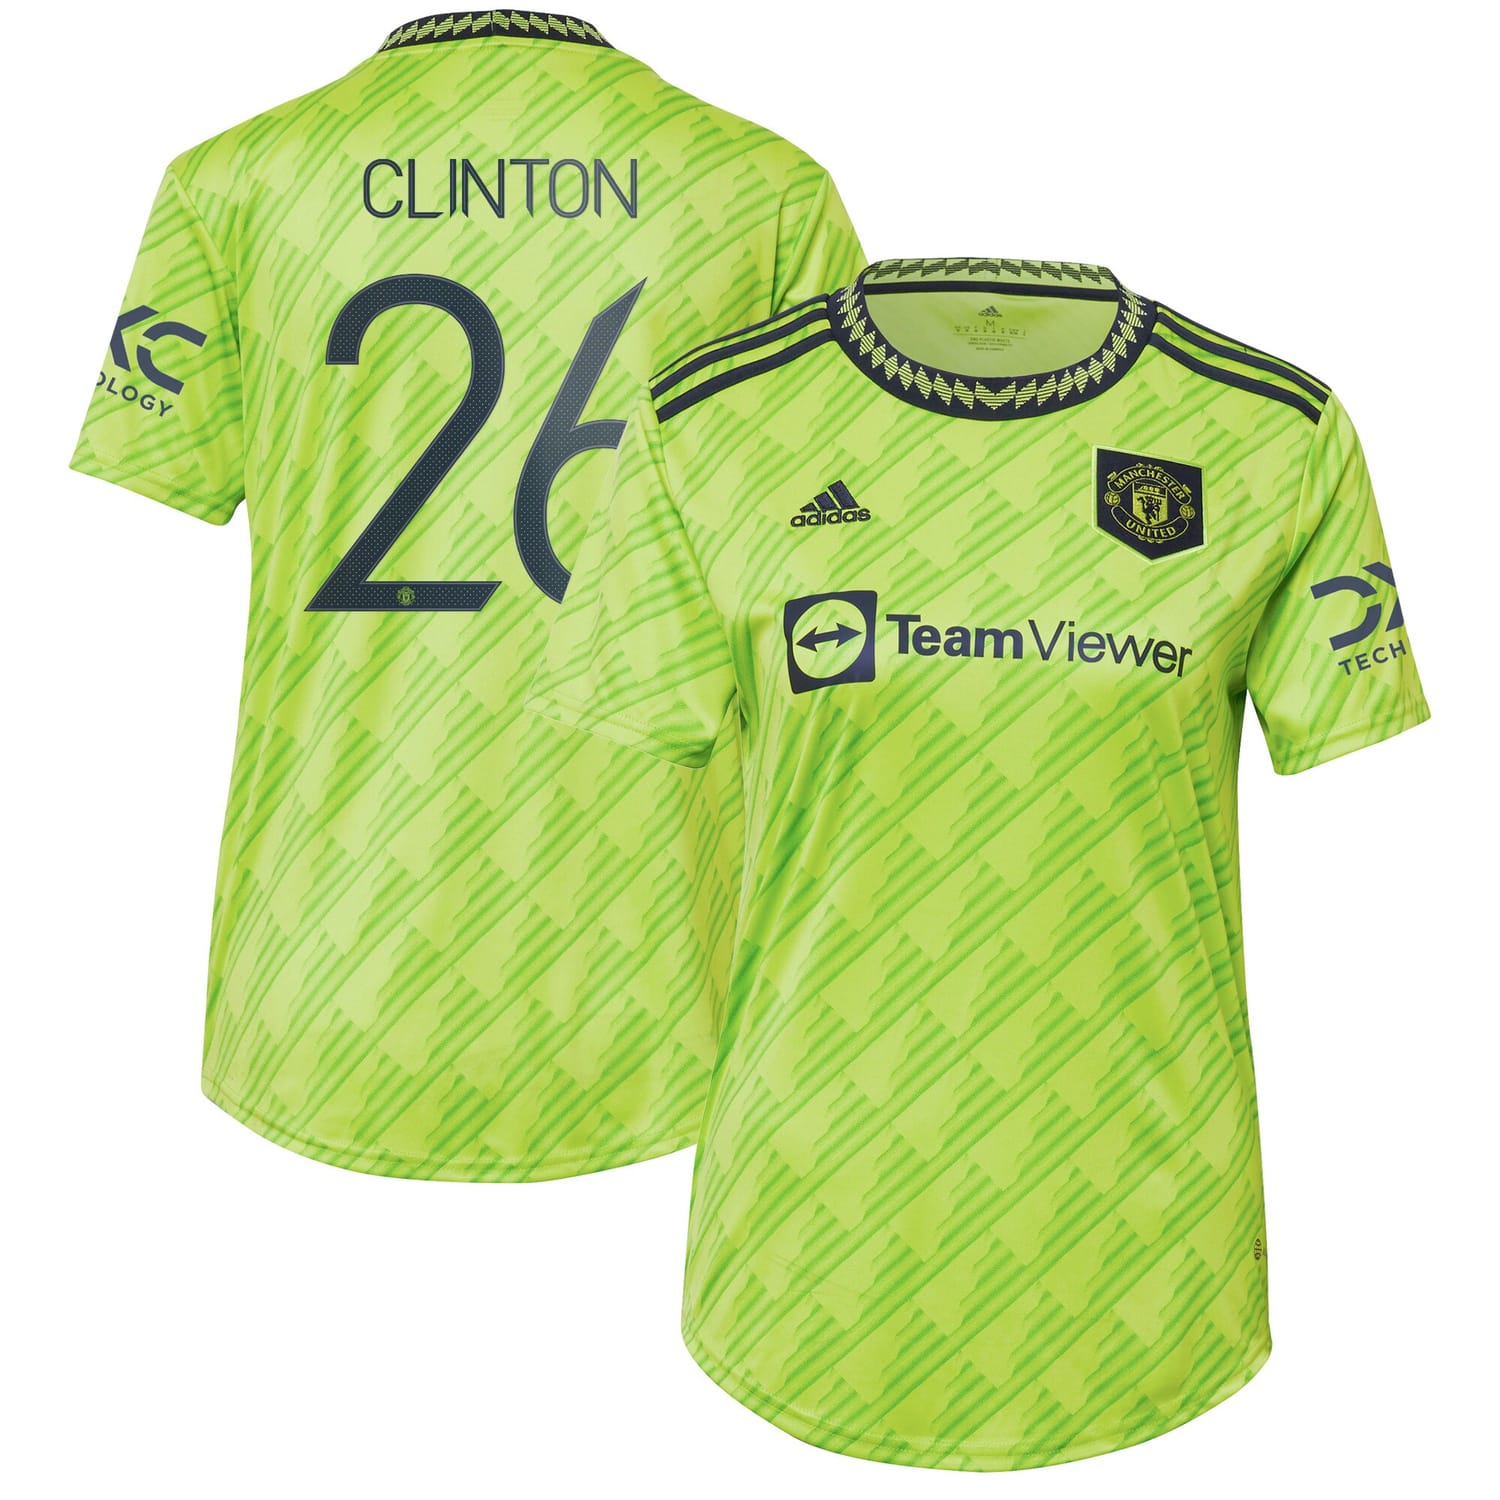 Premier League Manchester United Third Cup Jersey Shirt 2022-23 player Grace Clinton 26 printing for Women